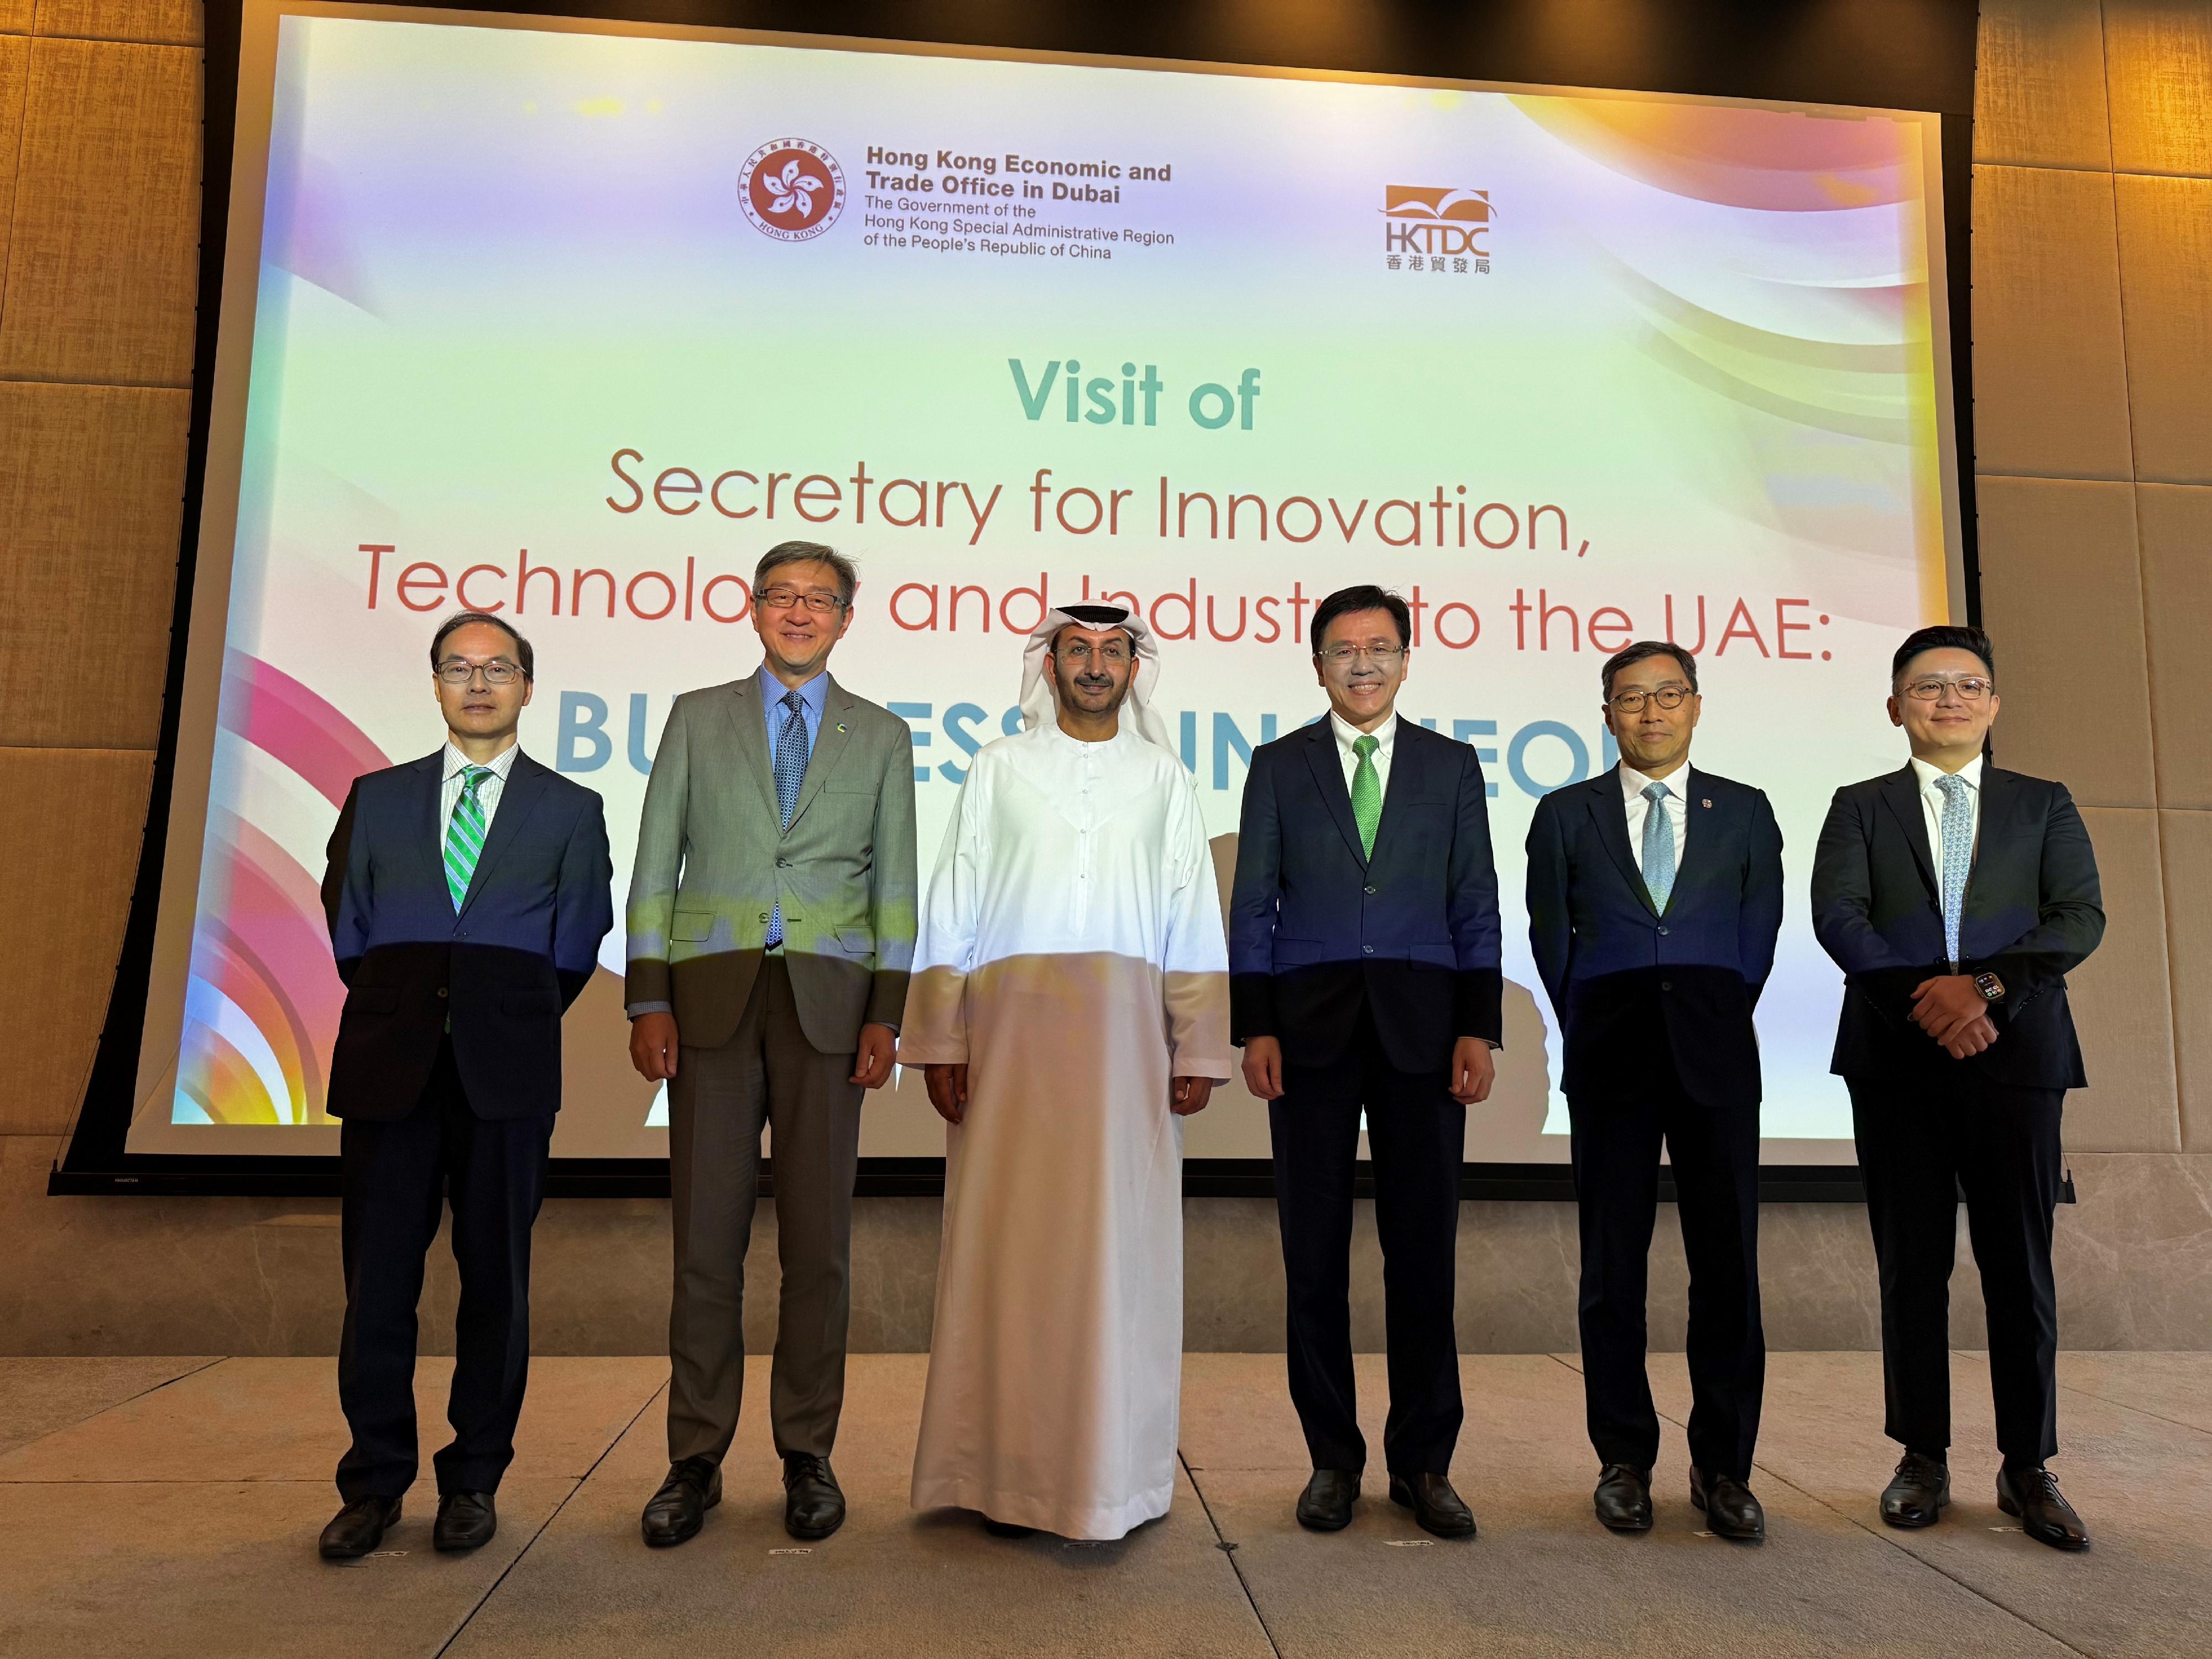 The Secretary for Innovation, Technology and Industry, Professor Sun Dong (third right), attended a business luncheon hosted by the Hong Kong Economic and Trade Office in Dubai on March 6 (Dubai time). Also attending are the Chief Executive Officer of the Hong Kong Science and Technology Parks Corporation, Mr Albert Wong (second right); the Chief Executive Officer of the Hong Kong Cyberport Management Company Limited, Mr Peter Yan (second left); and the Under Secretary of the Foreign Trade and Industry of the United Arab Emirates Ministry of Economy, Mr Abdulla Al Saleh (third left).
